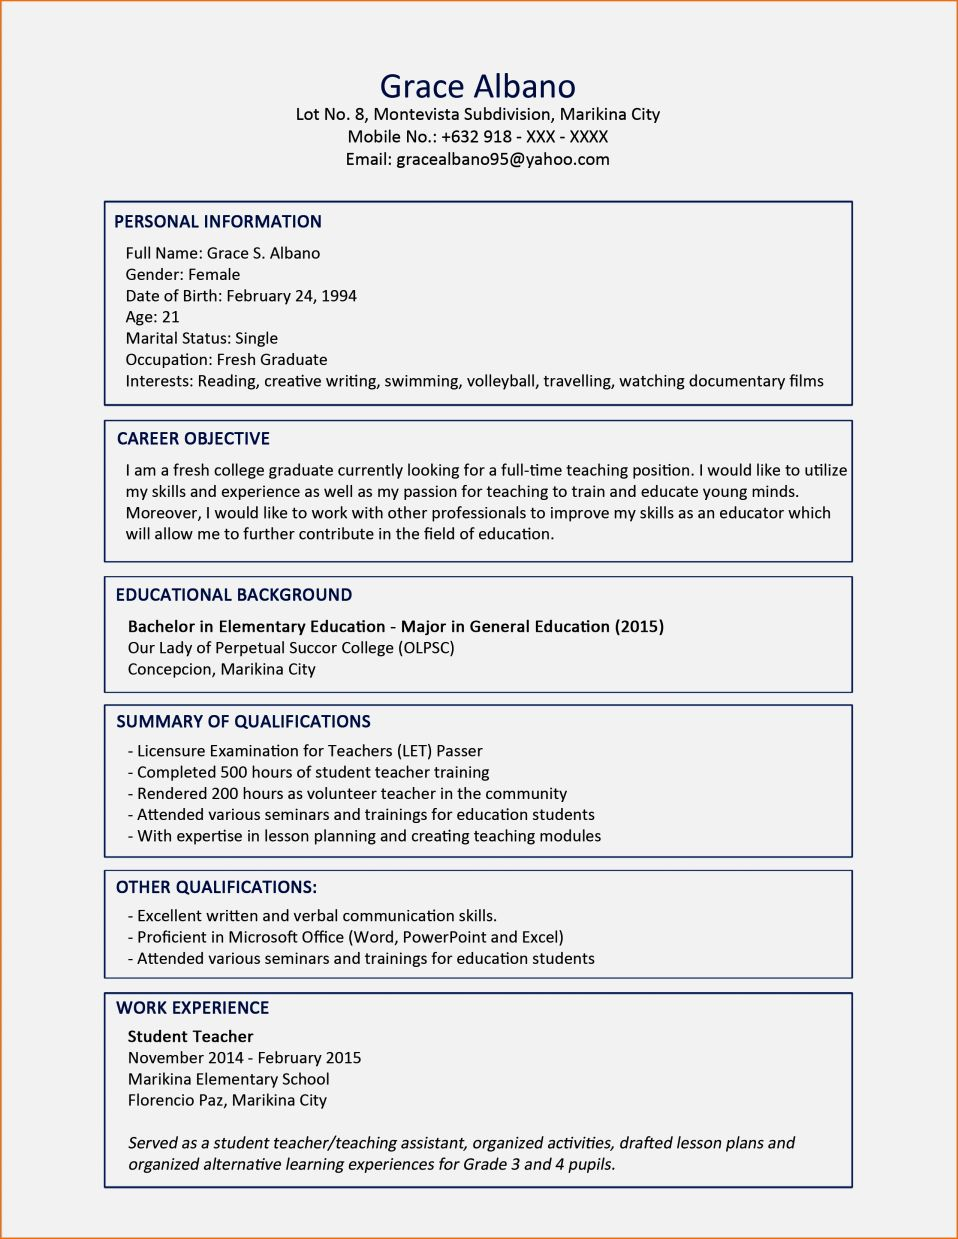 Sample Cover Letter For Fresh Graduates In Nigeria inside proportions 958 X 1239